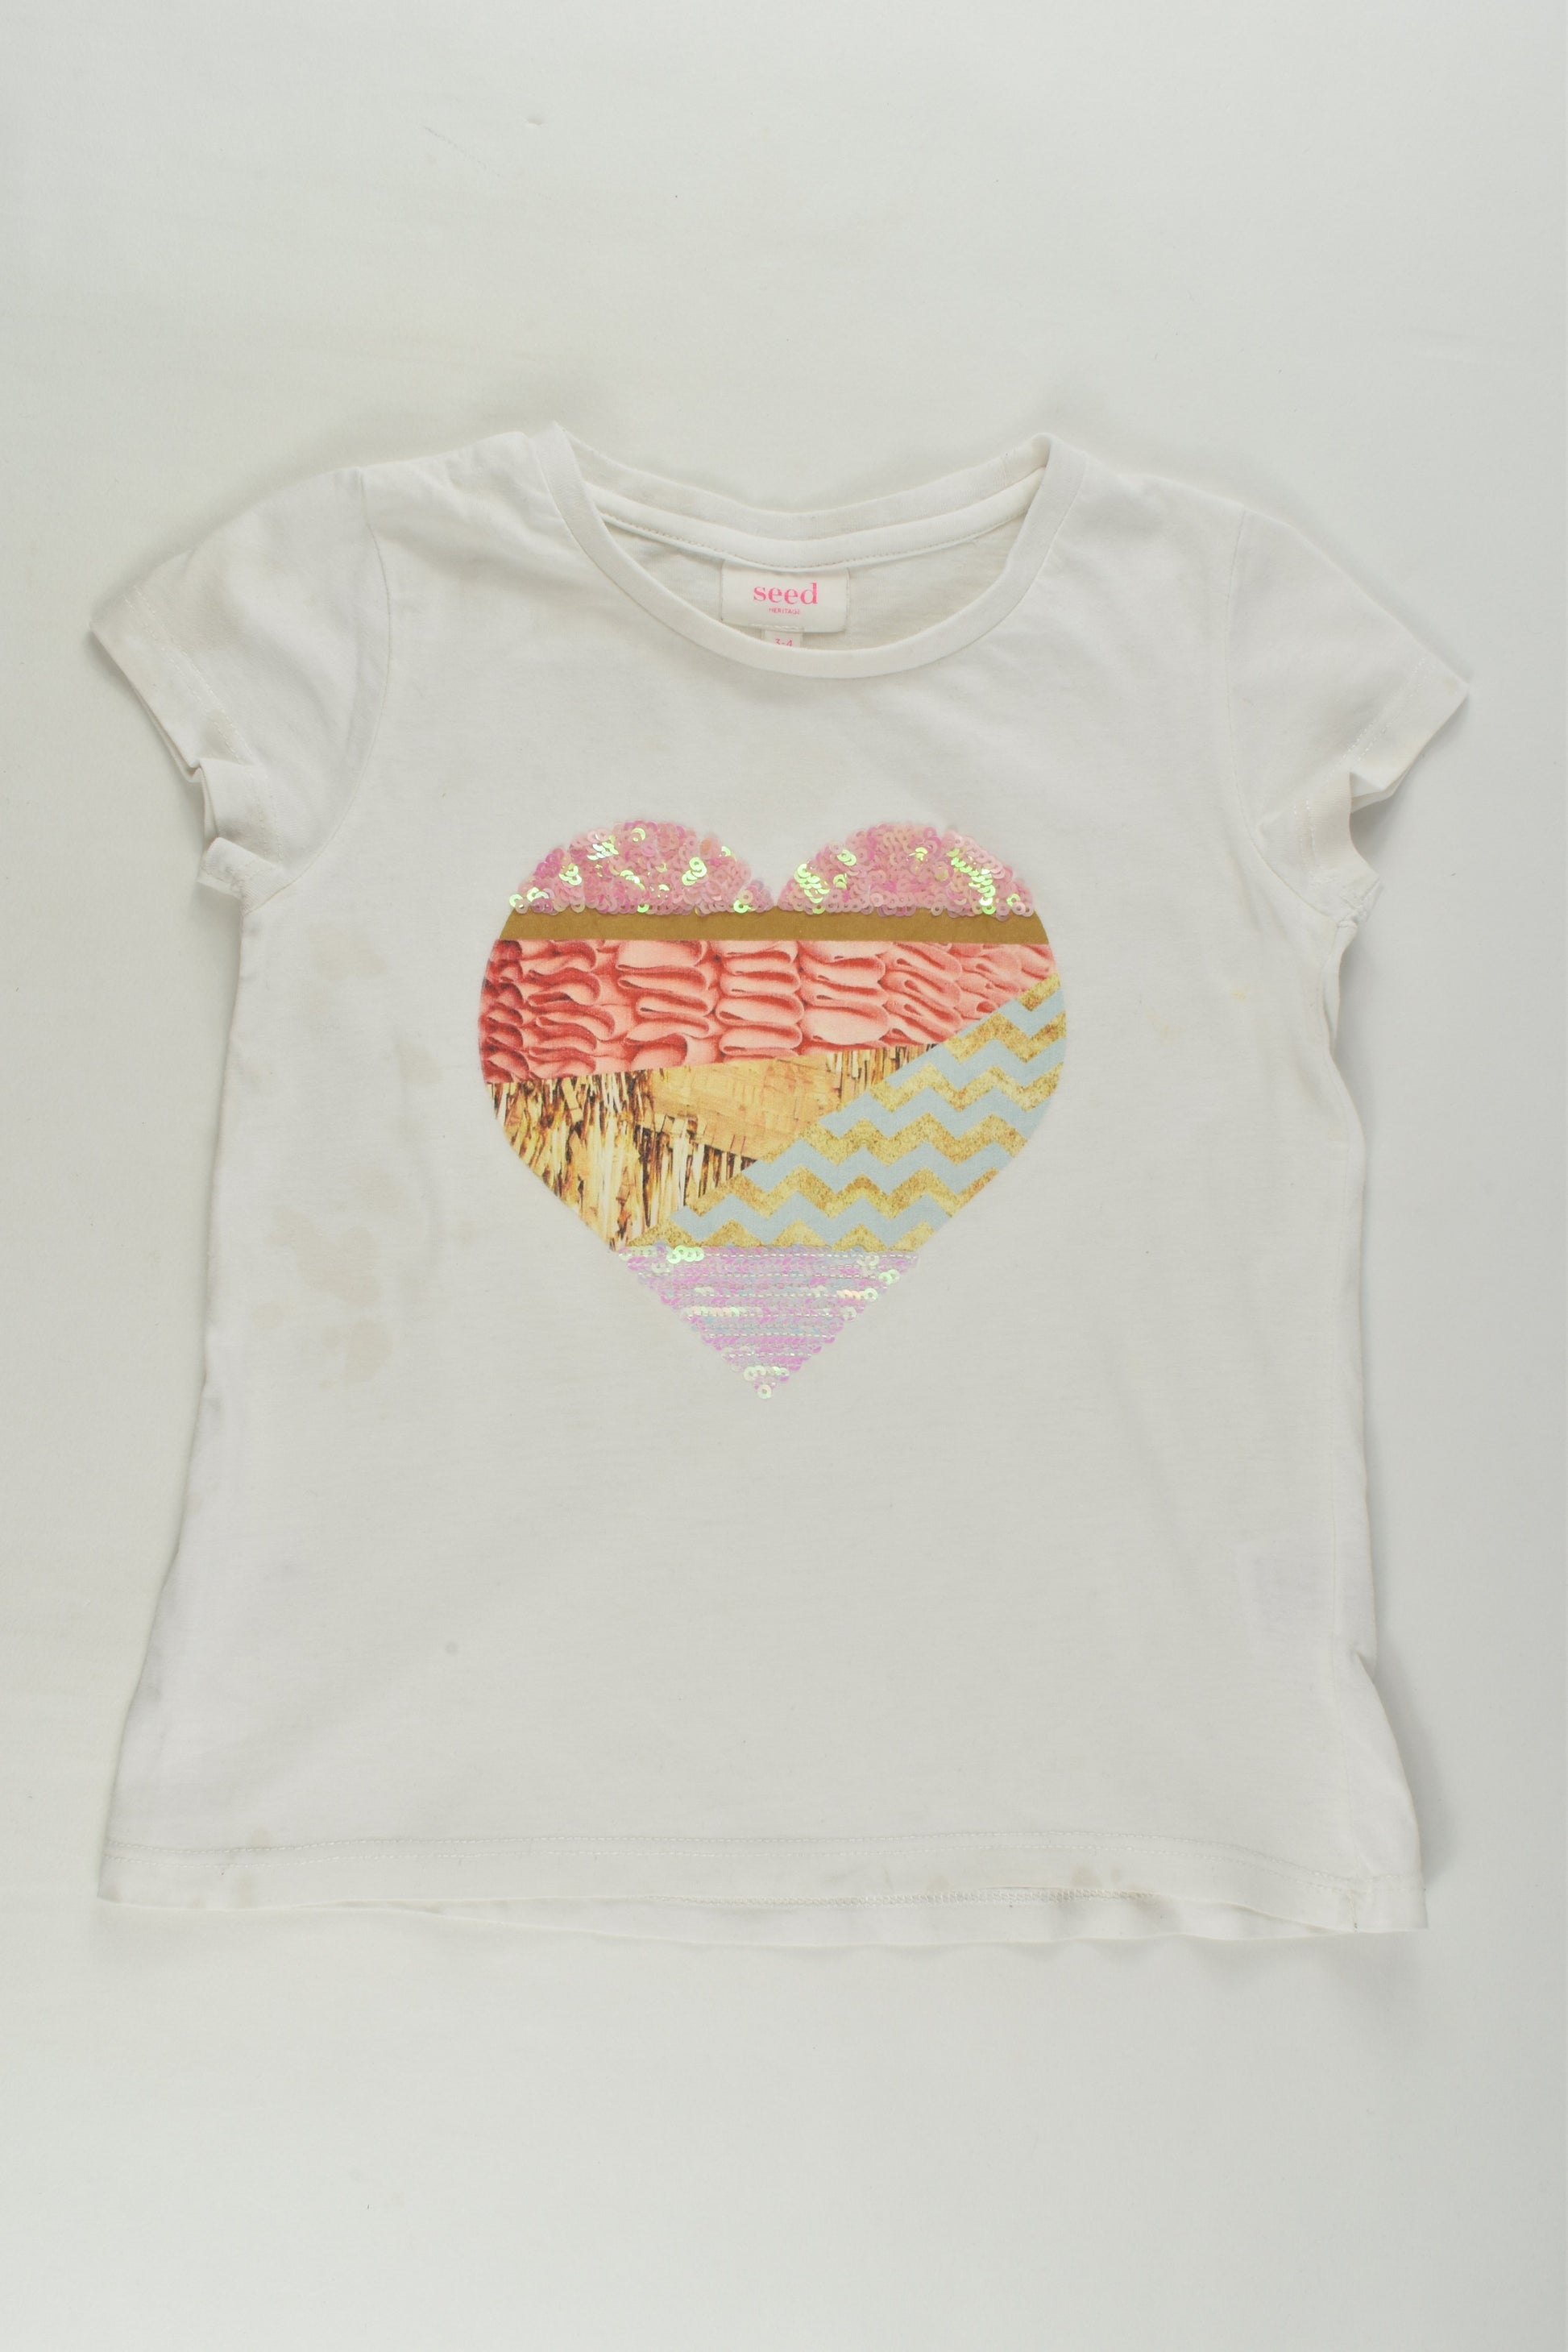 Seed Heritage Size 3-4 Love Heart T-shirt